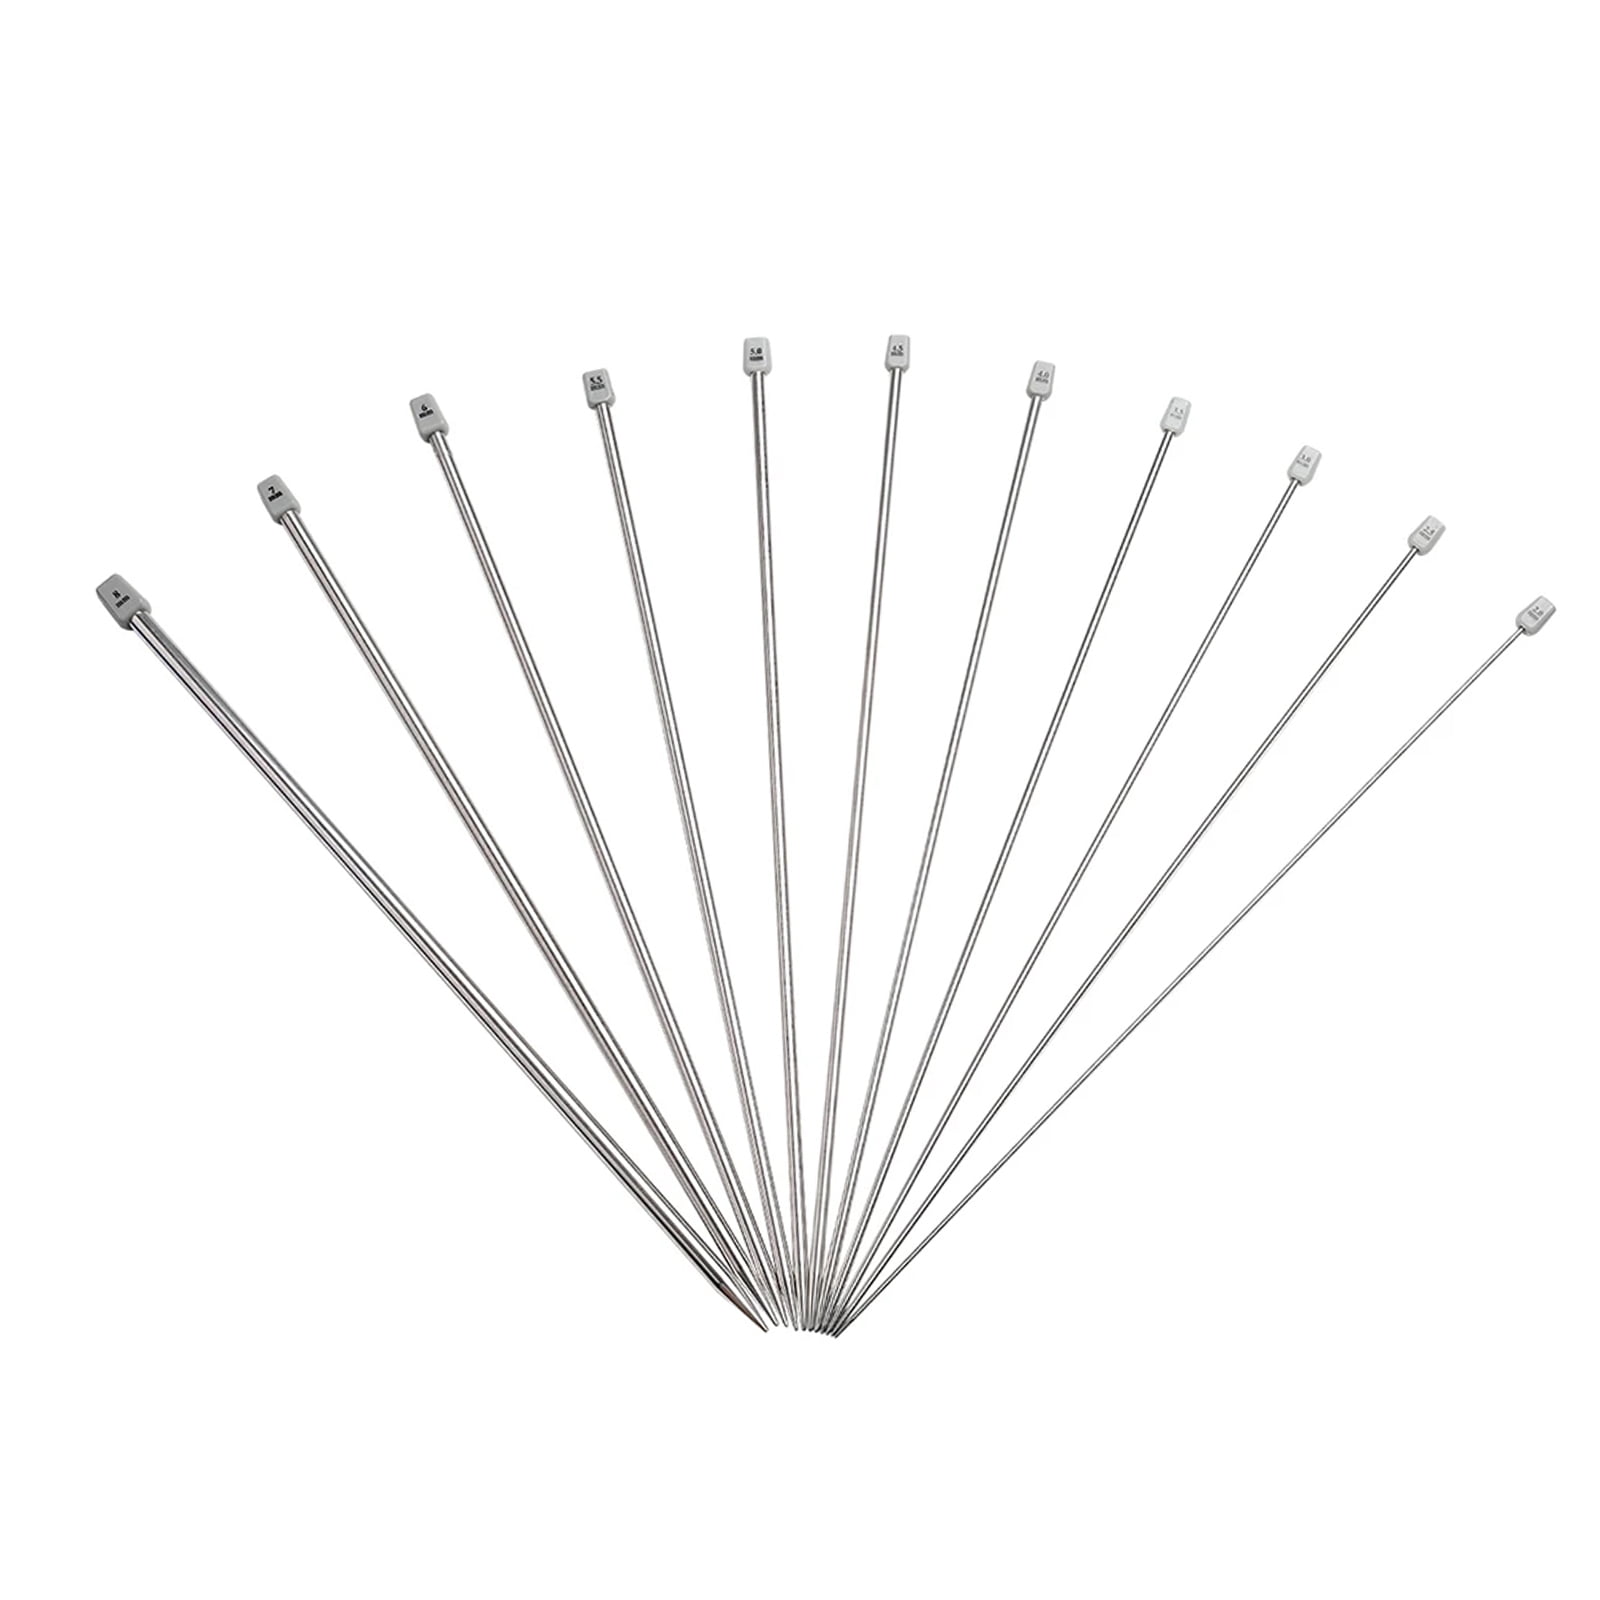 PAIR 25 CM'S STAINLESS STEEL SINGLE POINT KNITTING NEEDLES,IN SIZES 2MM-8MM 